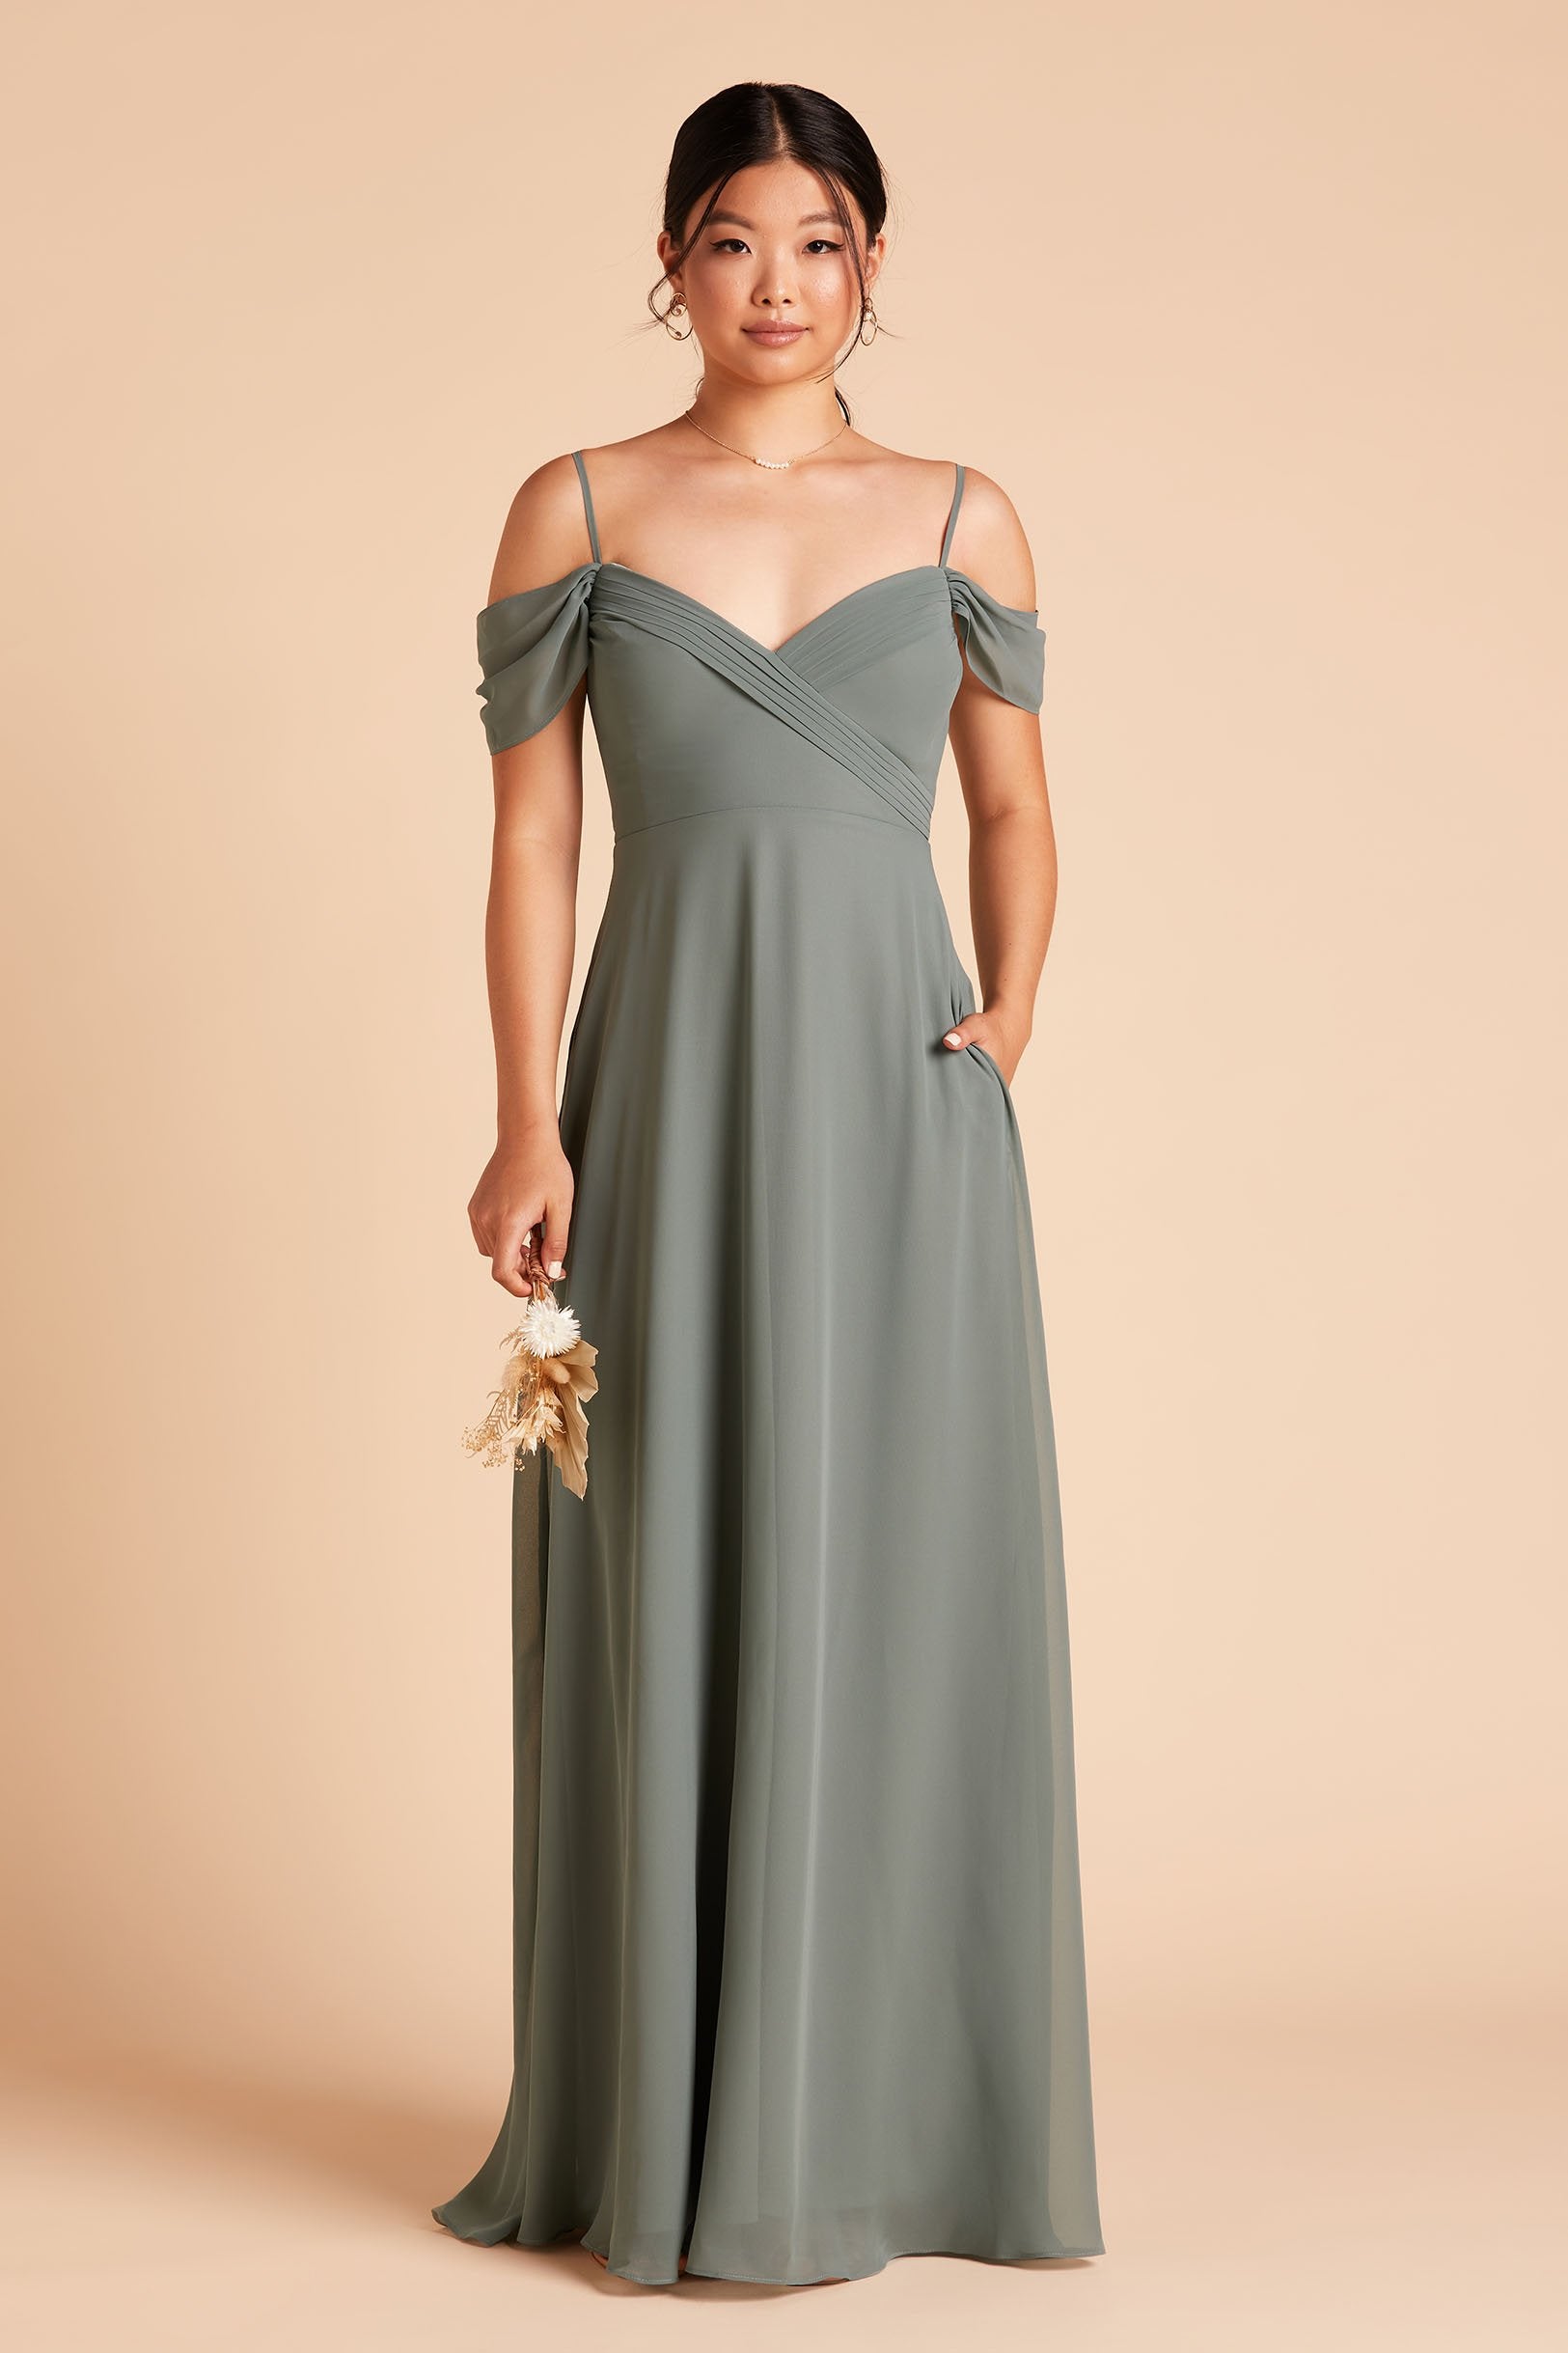 Spence convertible bridesmaid dress in sea glass green chiffon by Birdy Grey, front view with hand in pocket